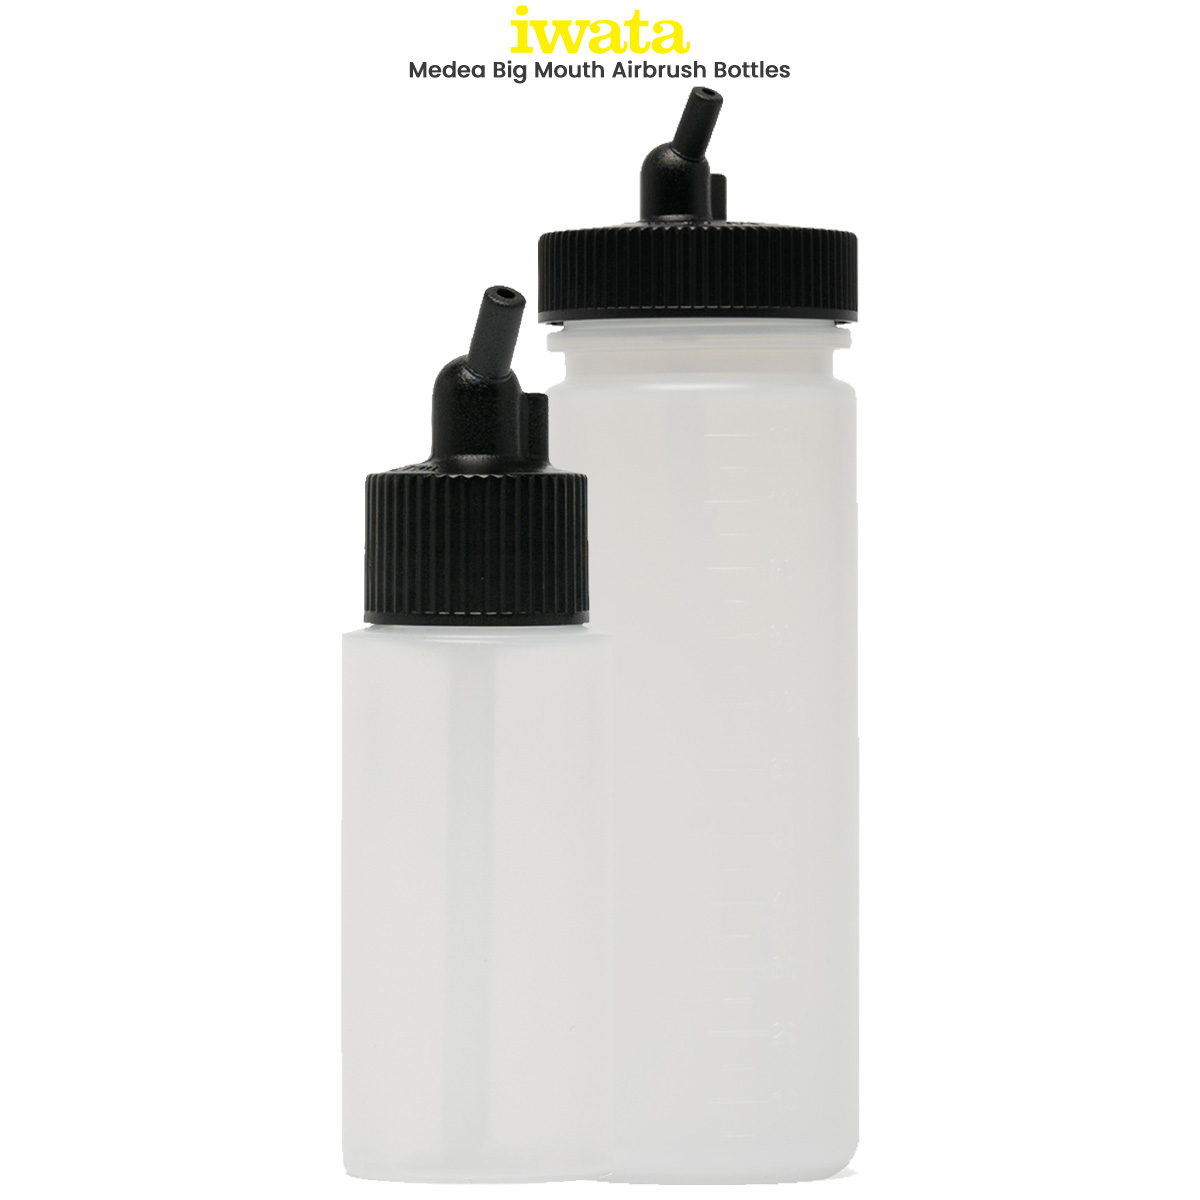 Medea Airbrush Cleaner with Invertible 360° Nozzle 16 oz: Anest  Iwata-Medea, Inc.